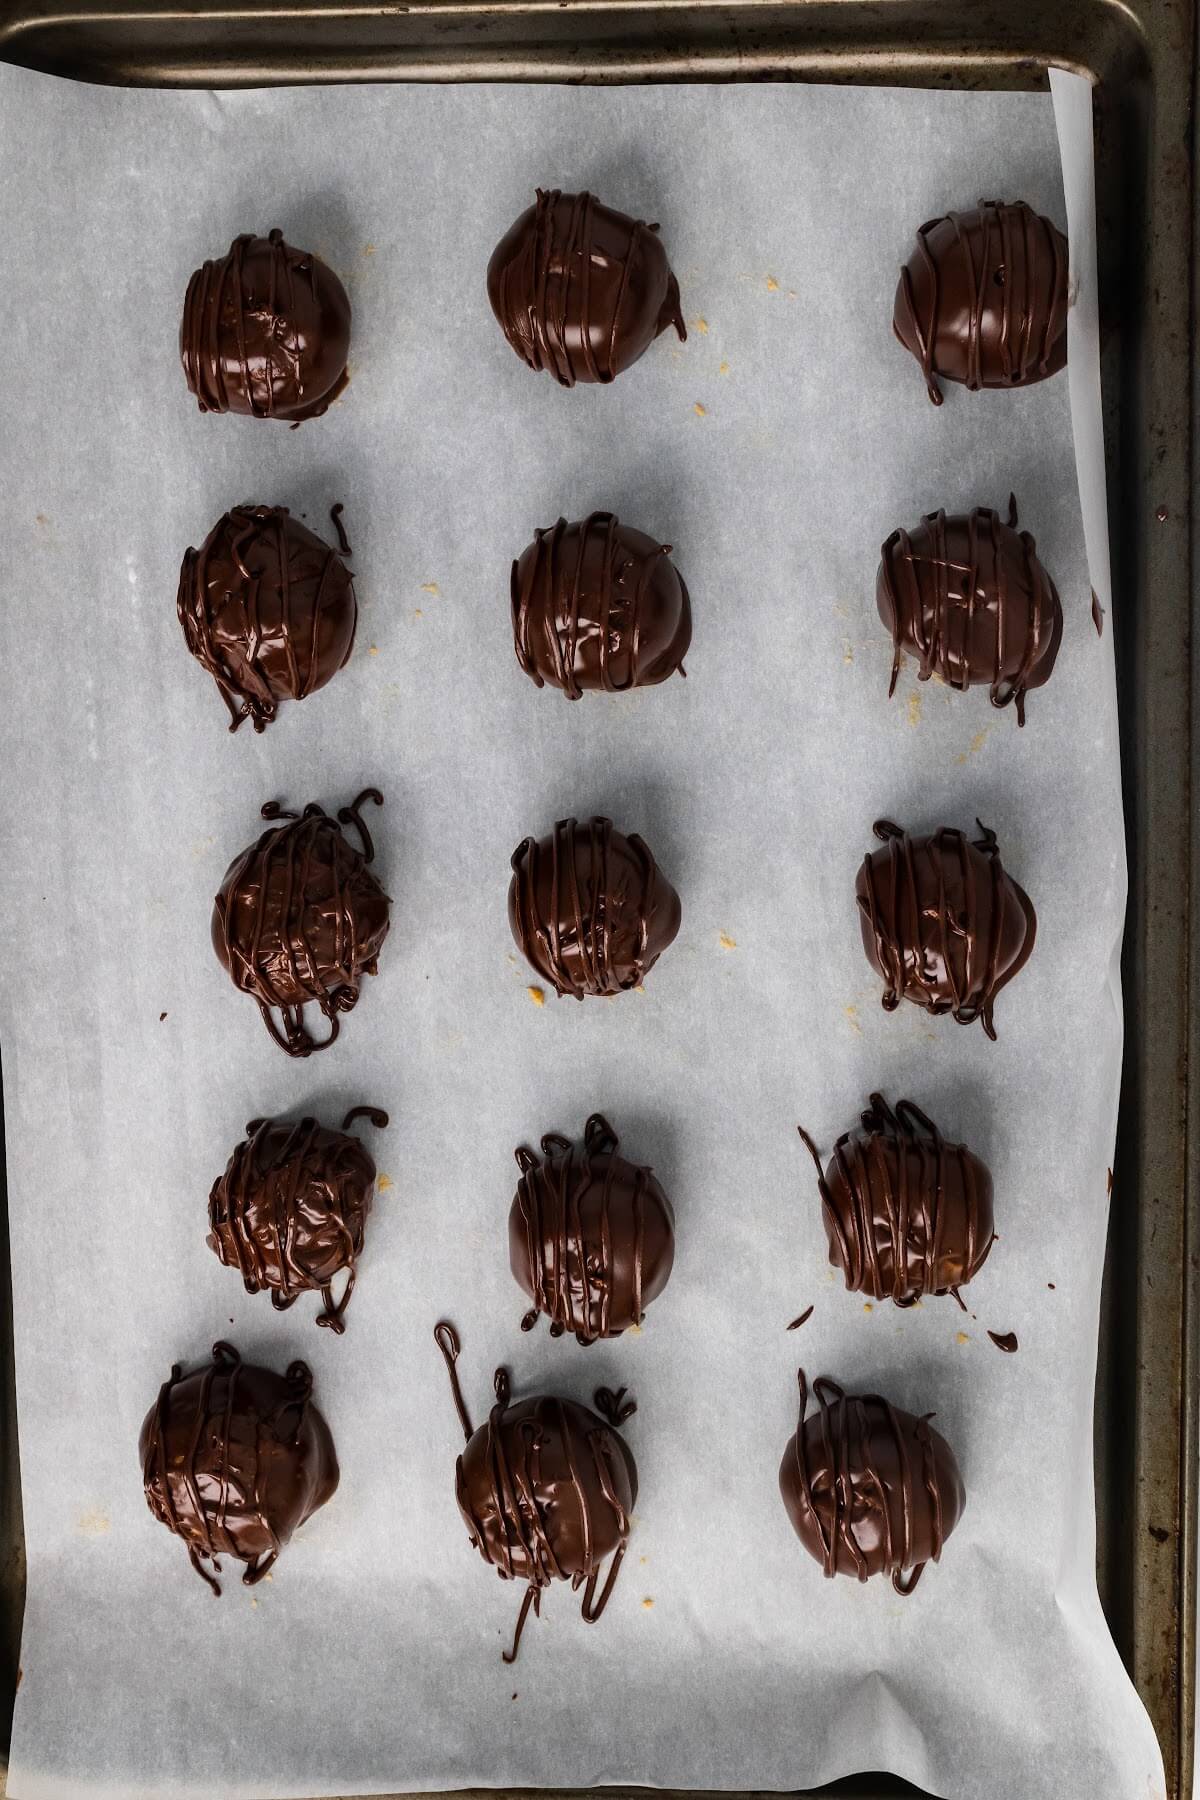 A baking sheet lined with parchment paper with 15 freshly coated chocolate truffles with drizzled chocolate over the tops of the truffles.